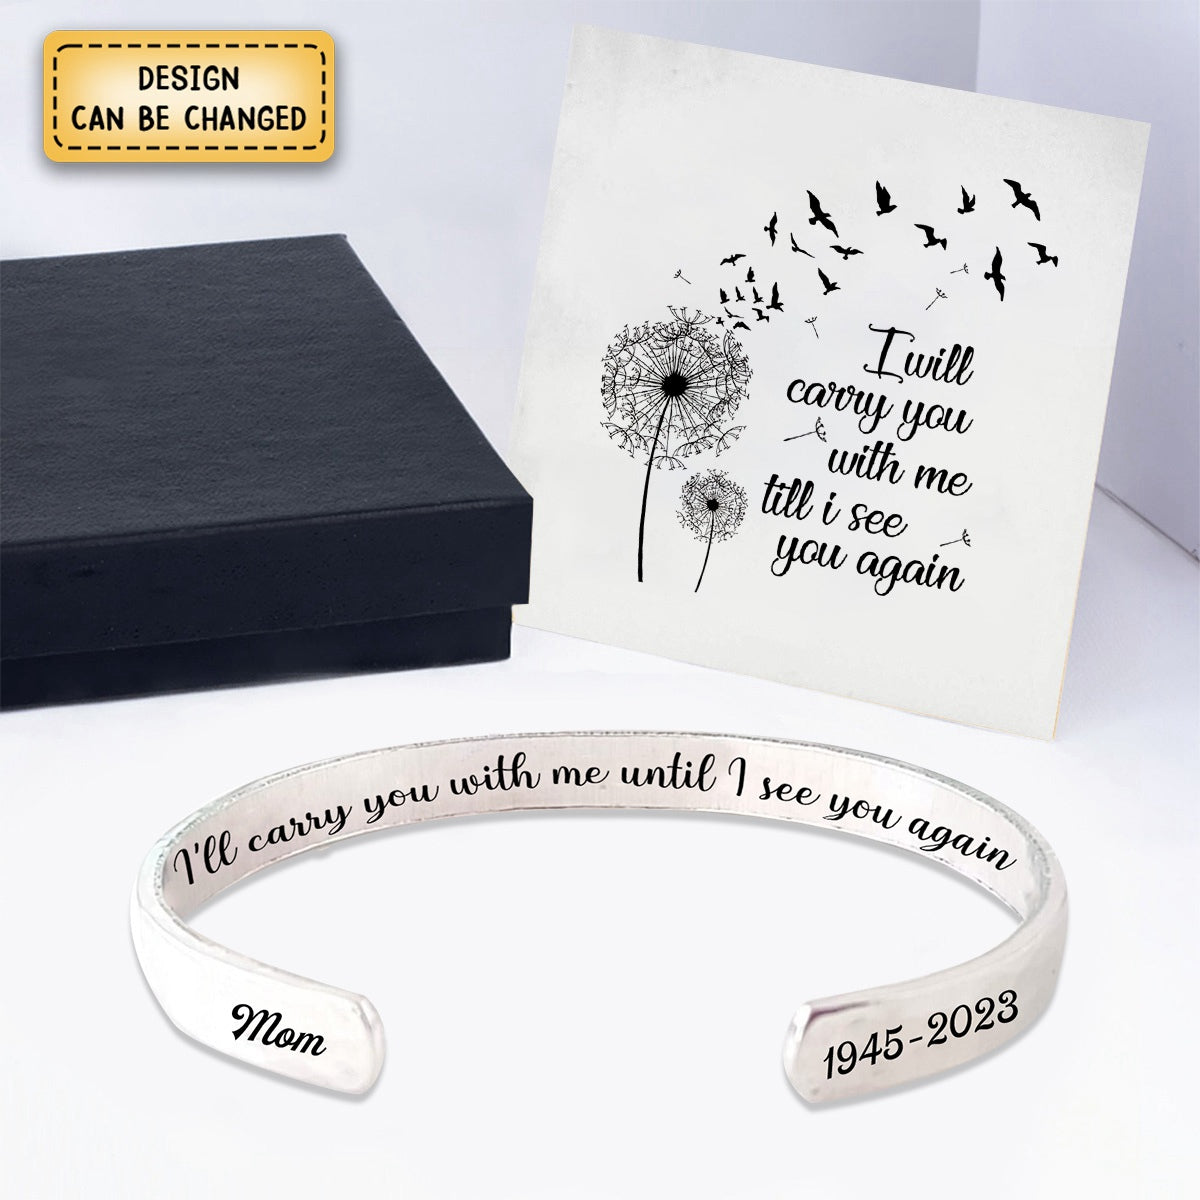 I Will Carry You With Me Until I See You Again - Personalized Engraved Bracelet